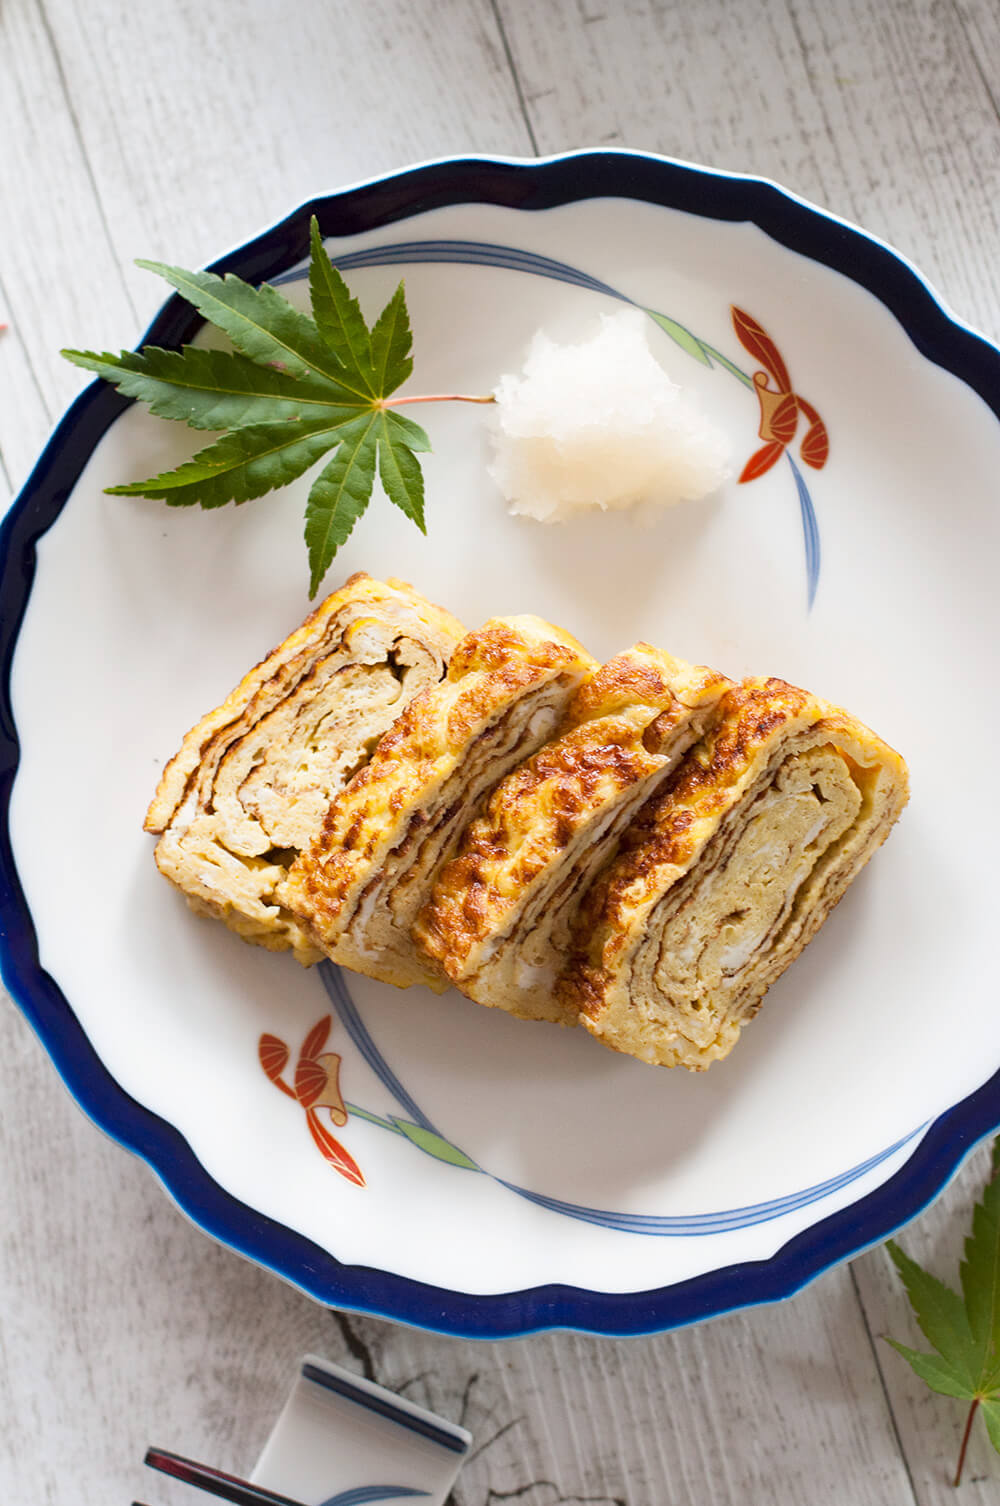 The typical egg dish in Japanese cuisine, dashimaki tamago (出し巻き卵, Japanese rolled omelette) is made by rolling thin layers of egg in the frypan. The beautiful layers of the egg when sliced, and the sweet dashi flavour make this omelette so unique.